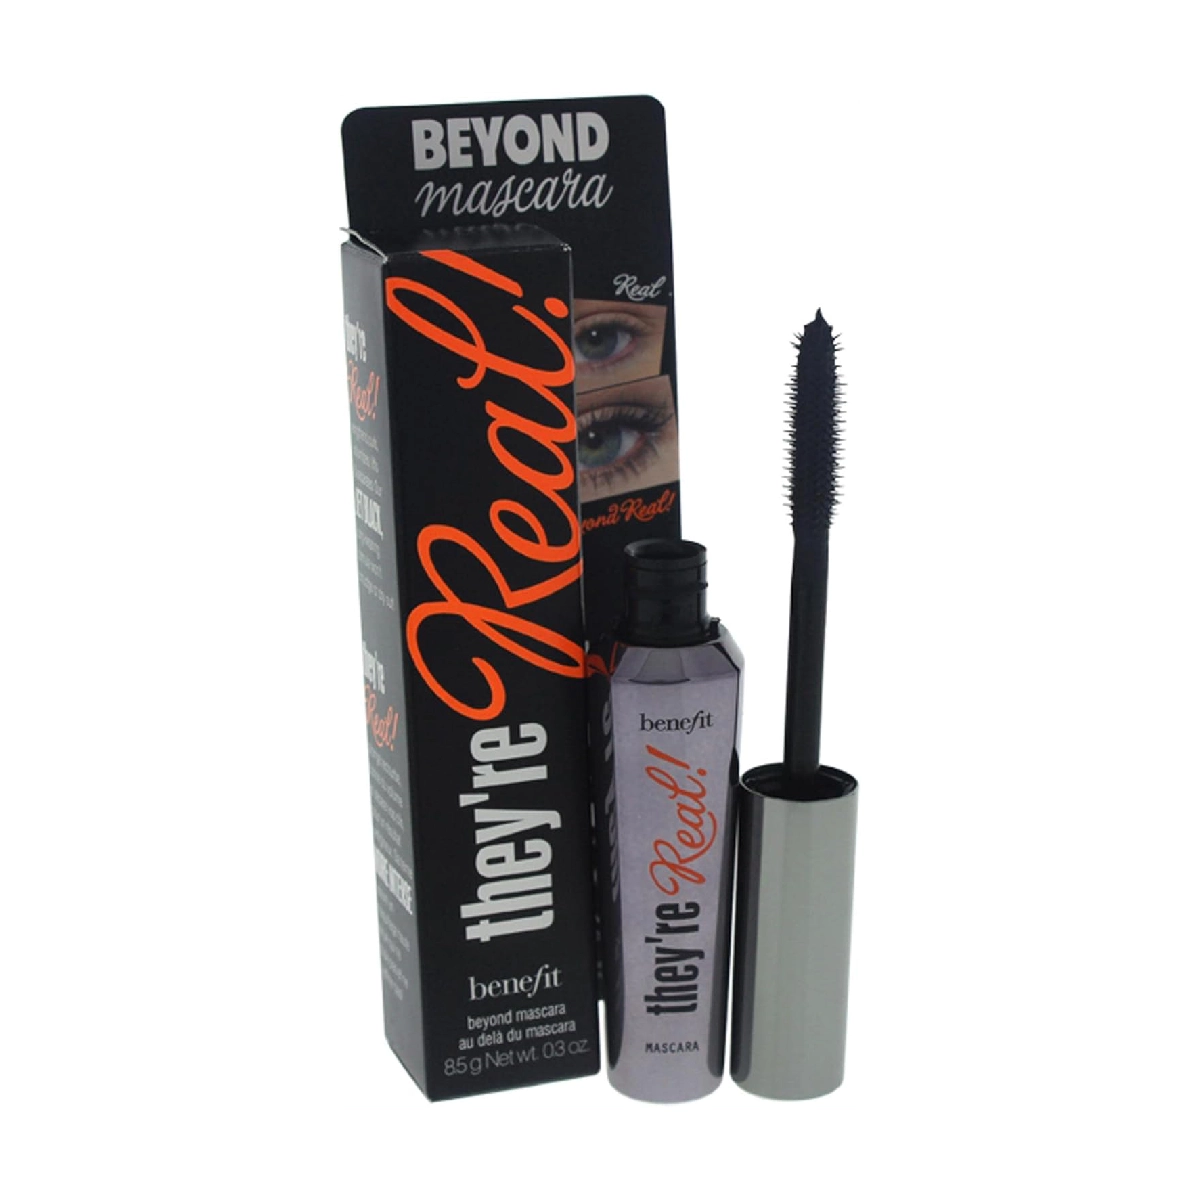 Benefit Cosmetics They're Real! Beyond Mascara - a mascara tube on a white background